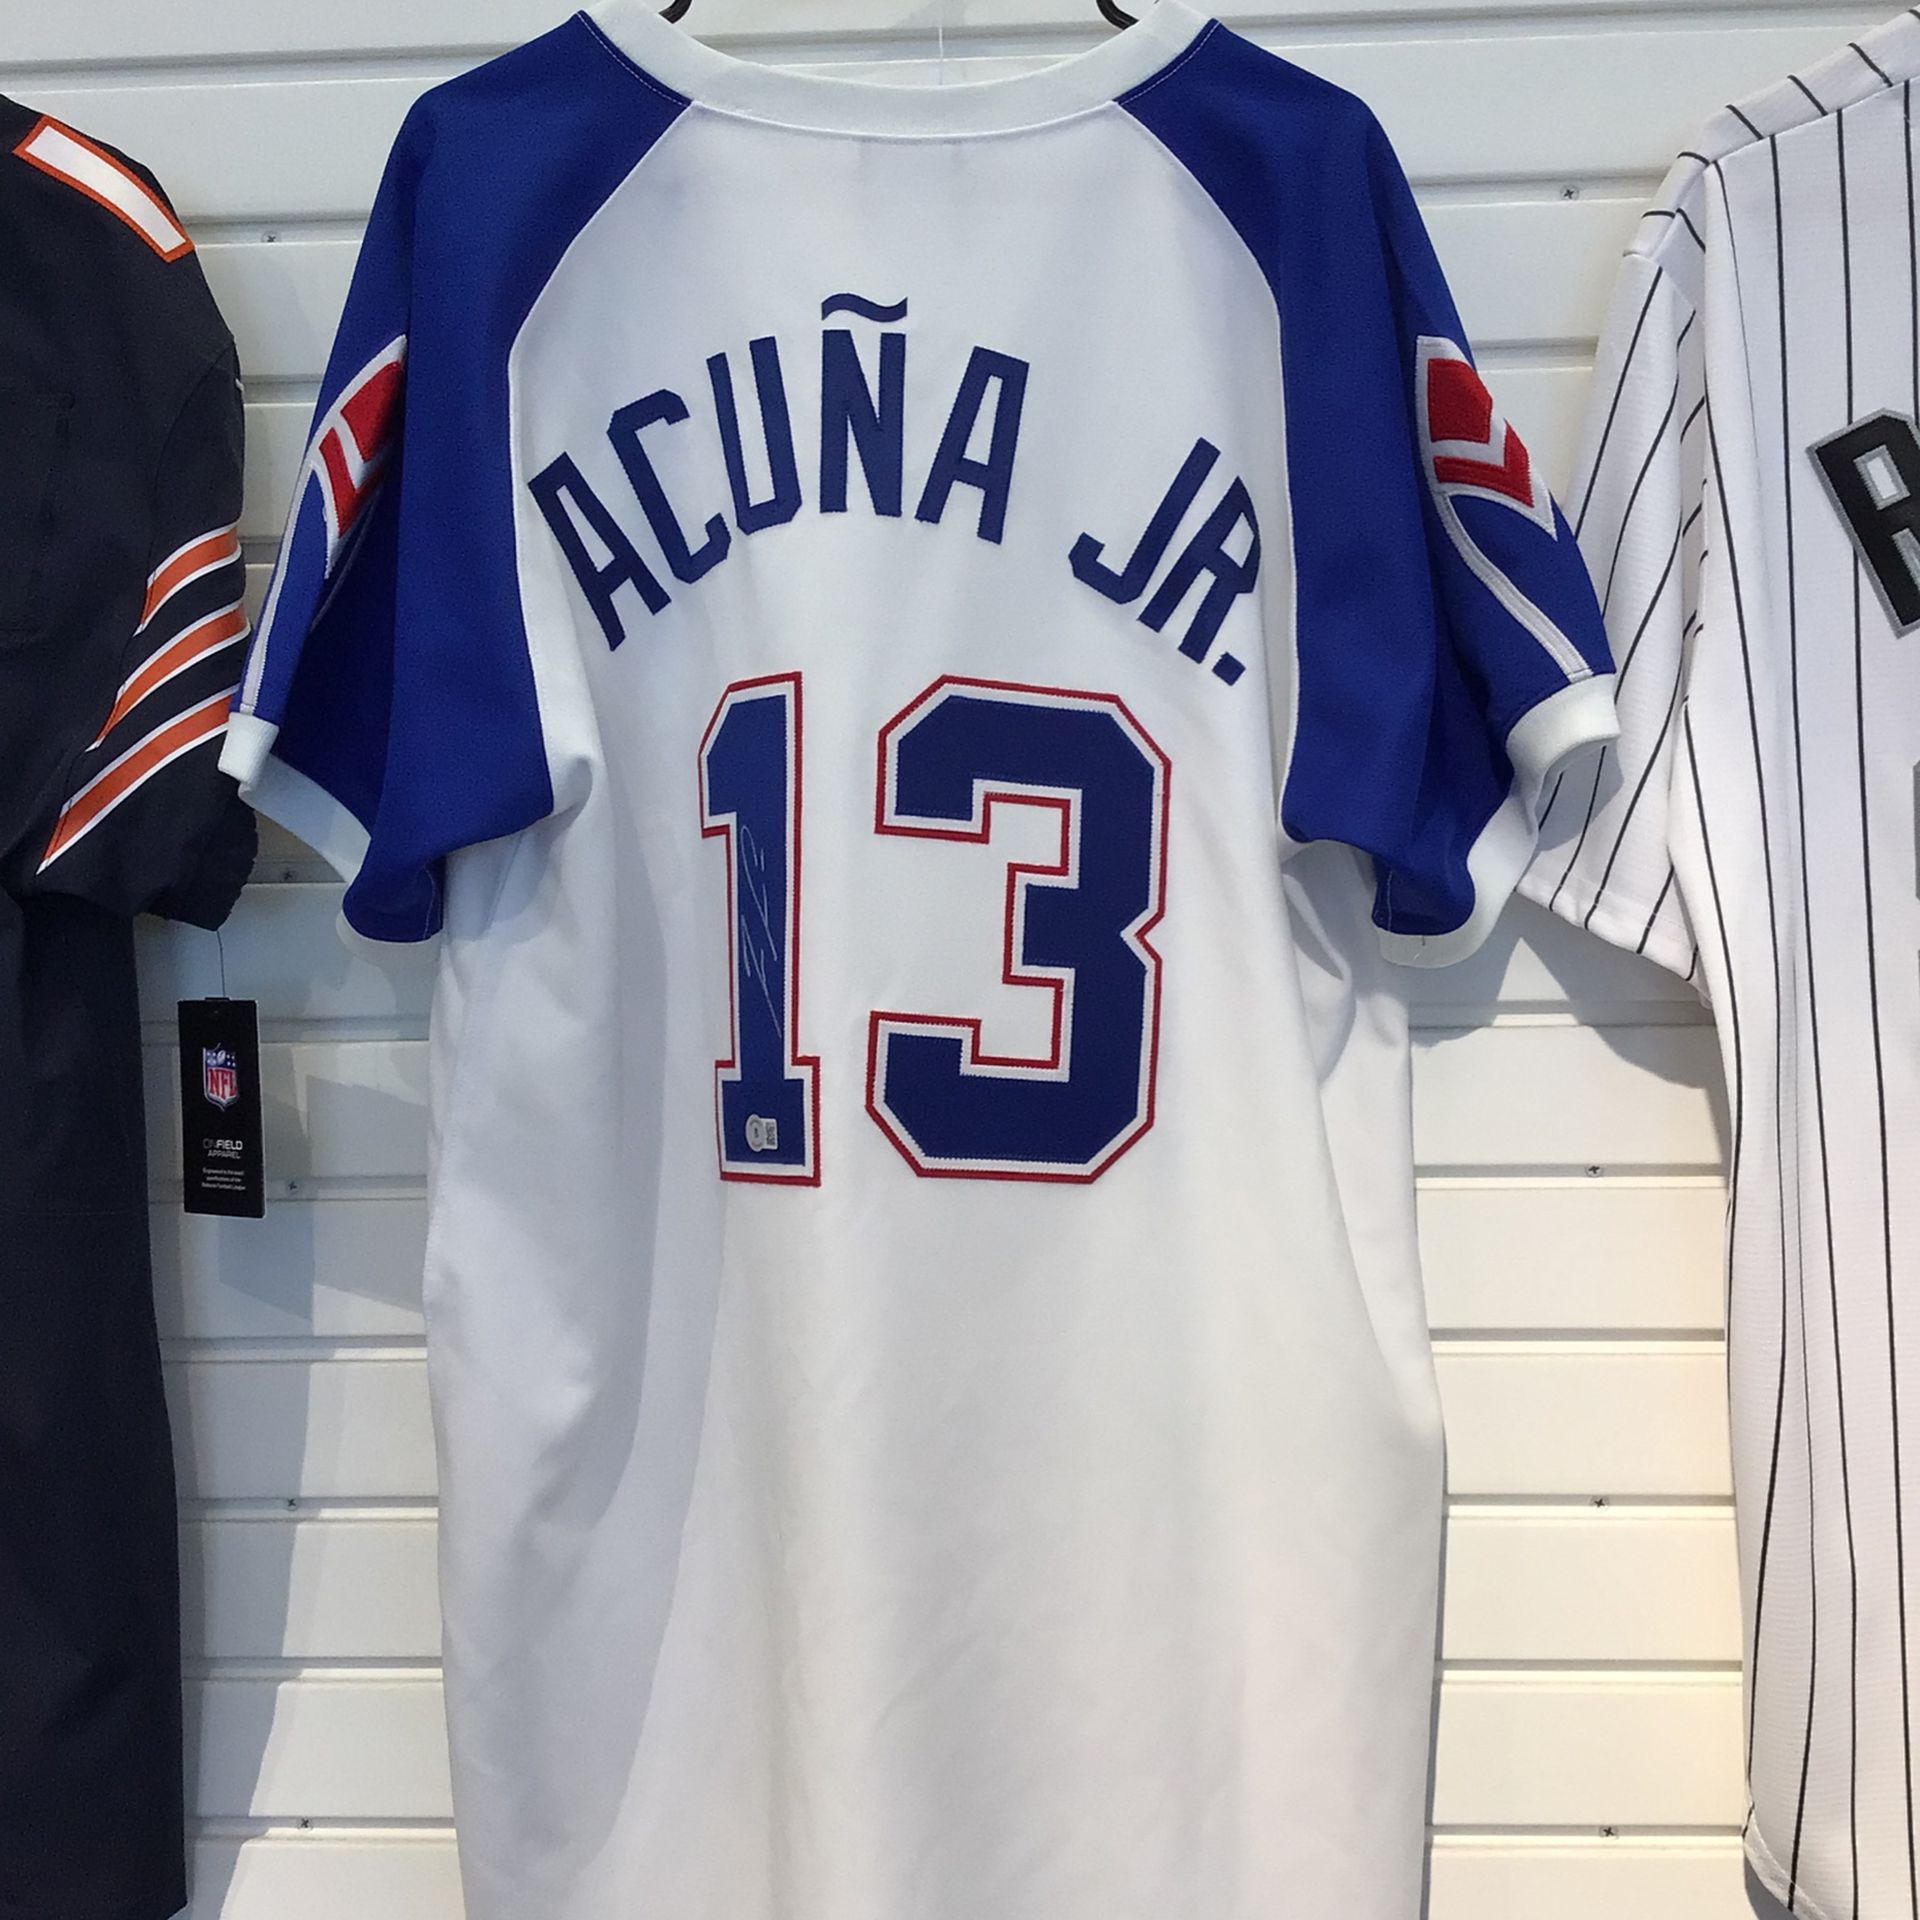 Autographed Atlanta Braves Acuna Jr. Jersey With Authentication for